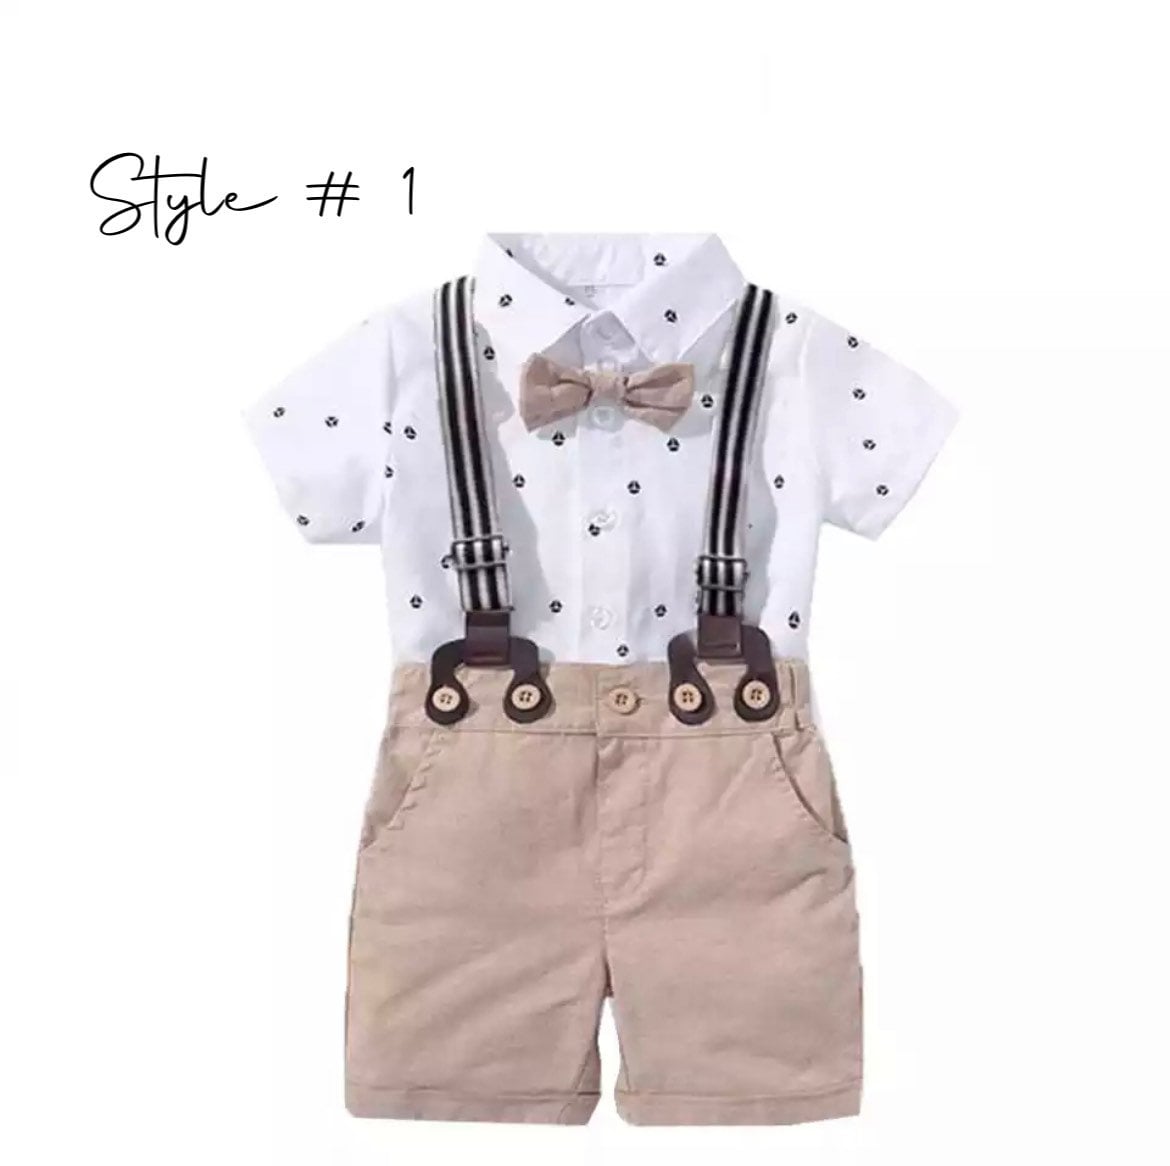 Berkeley - Baby Boy Gentleman Romper Suit Set-This outfit is designed for a little Gentlemen.This will dress up your little baby boy to look special for many / any occasions - well made and so cute on!This is tr-Bijou Bubs